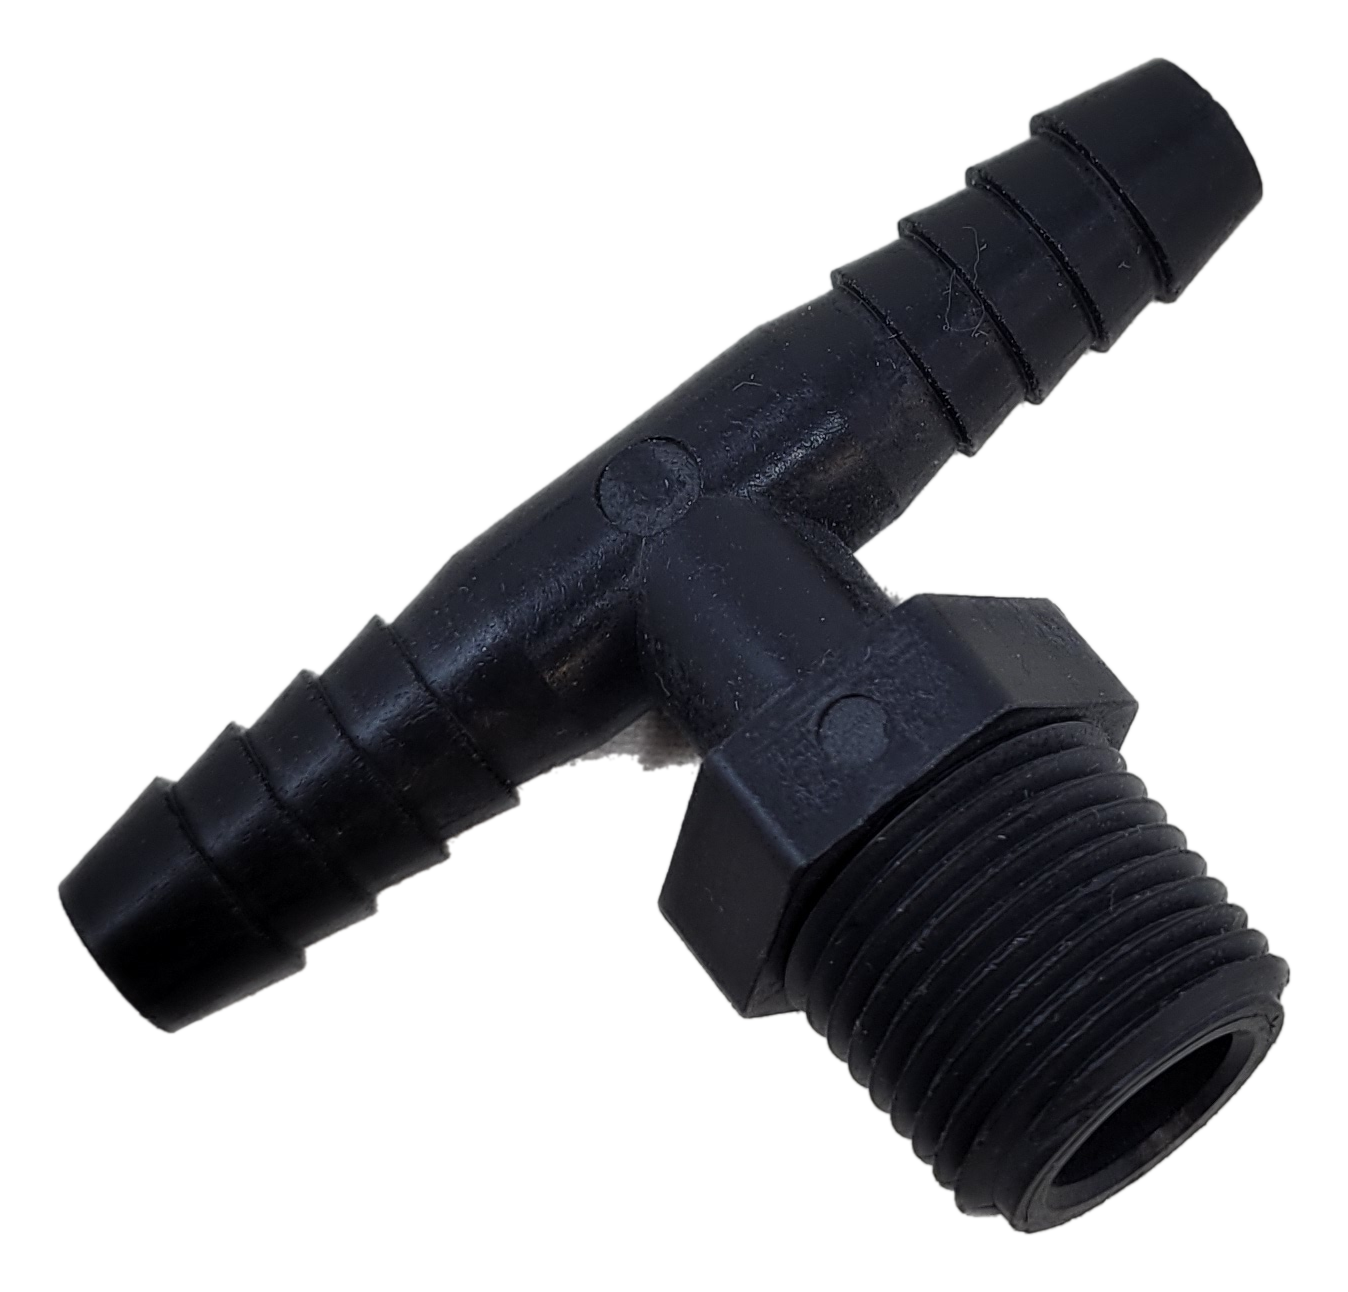 3/8" Double Barb to 1/4" MPT Thread Adaptor for Wilger Swivel Nozzle Bodies